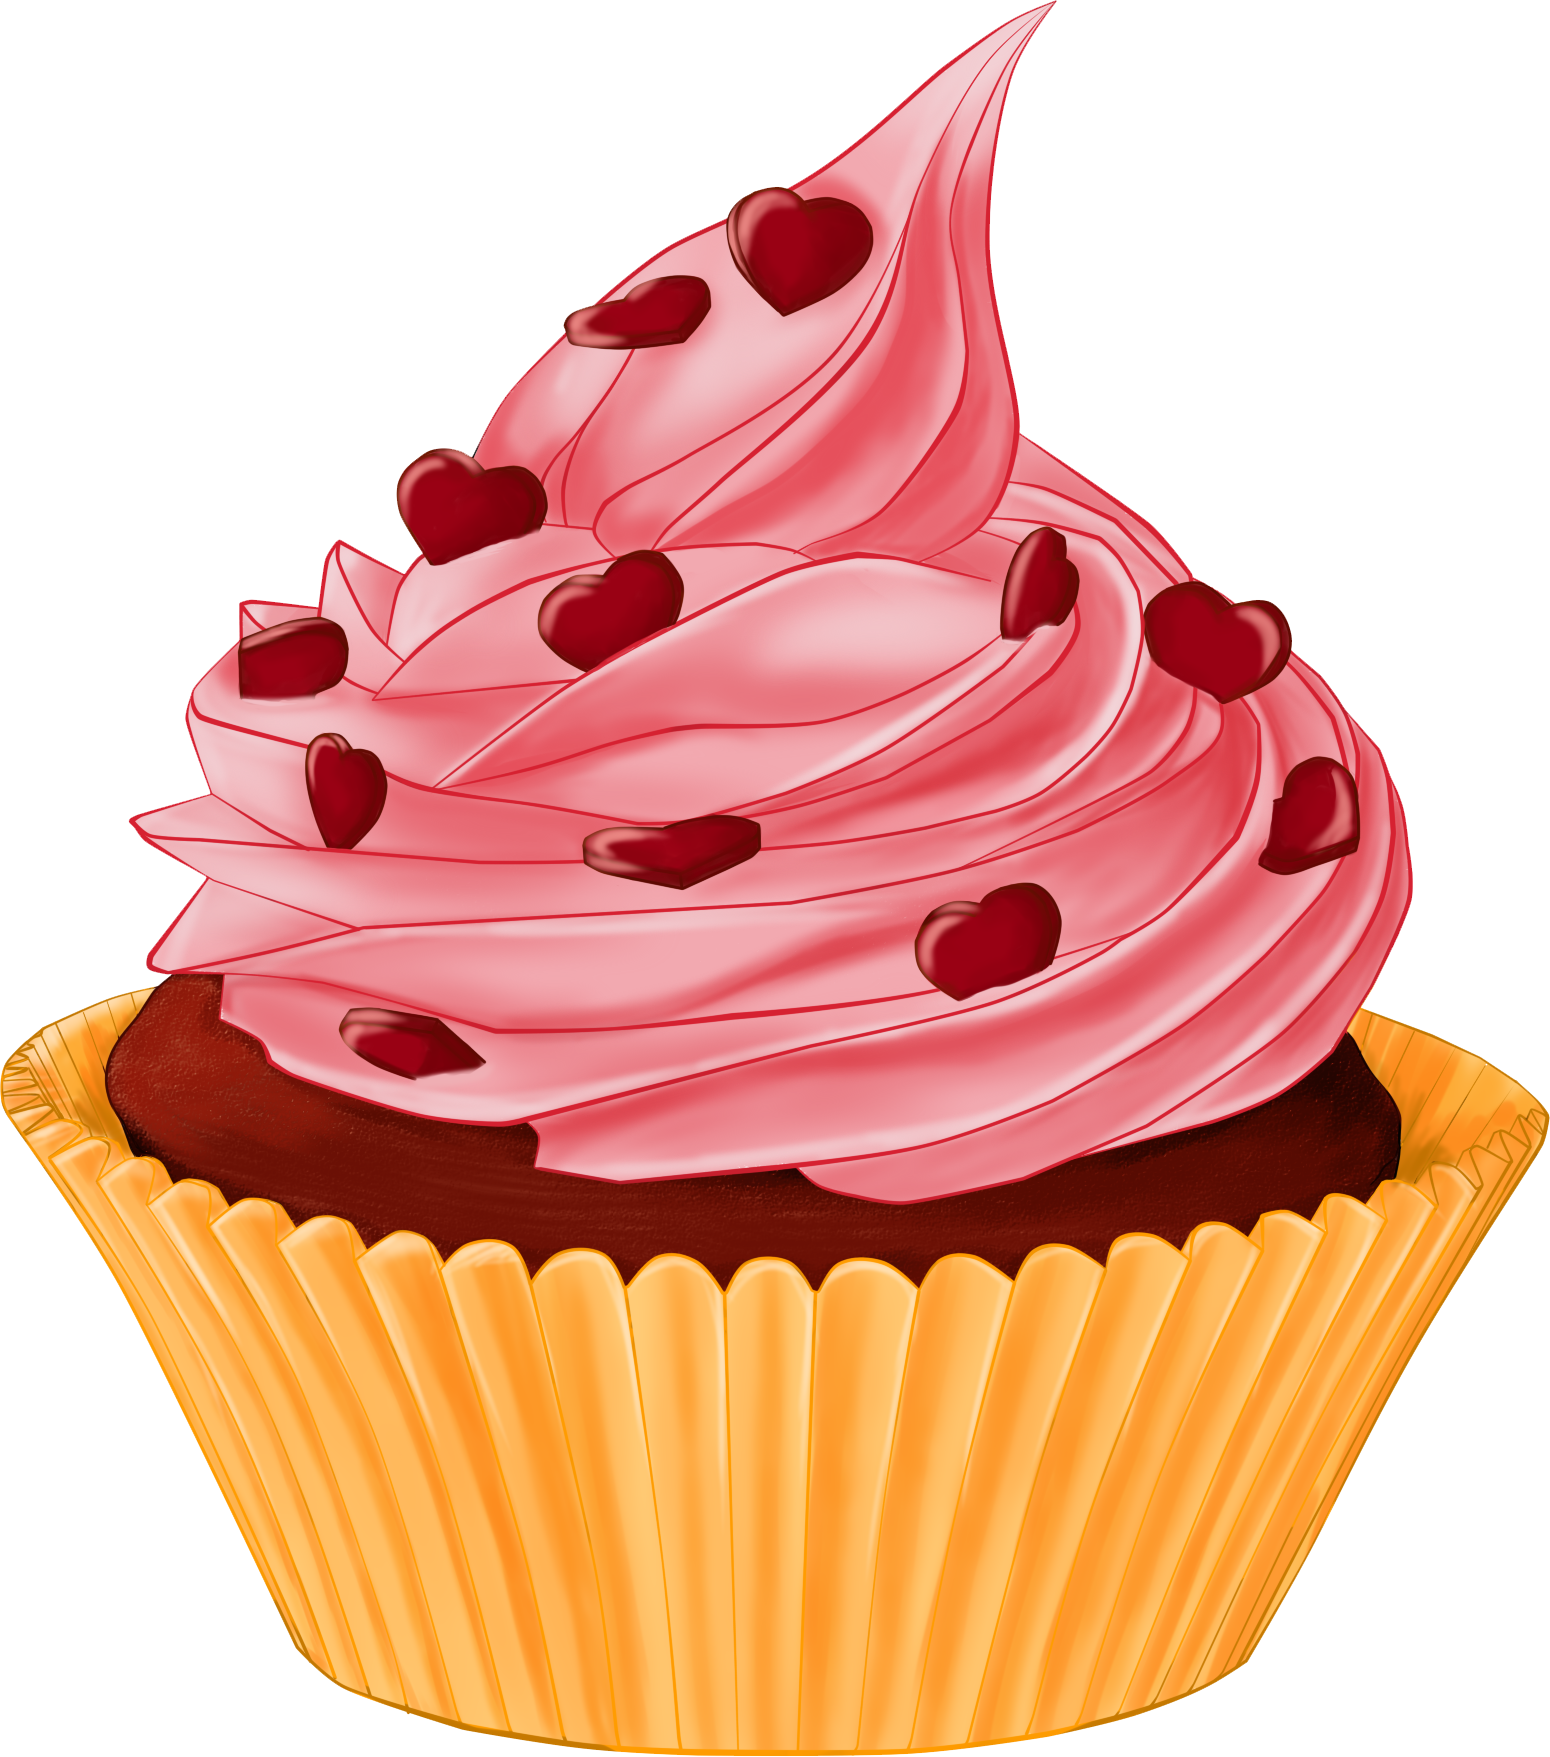 Free Cupcakes Drawing, Download Free Cupcakes Drawing png images, Free